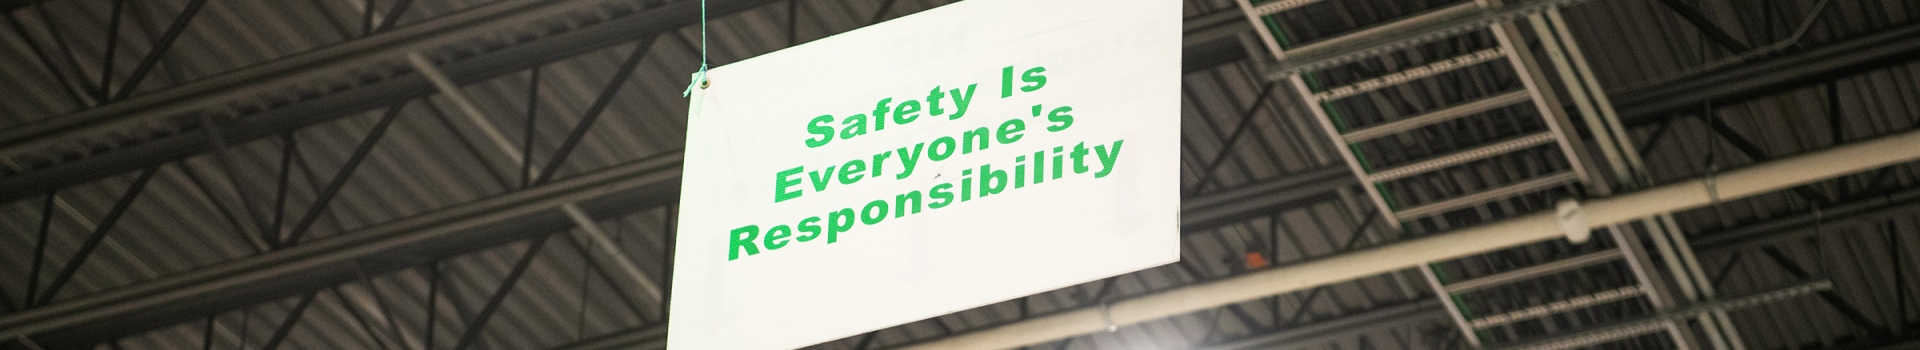 safety is responsibility